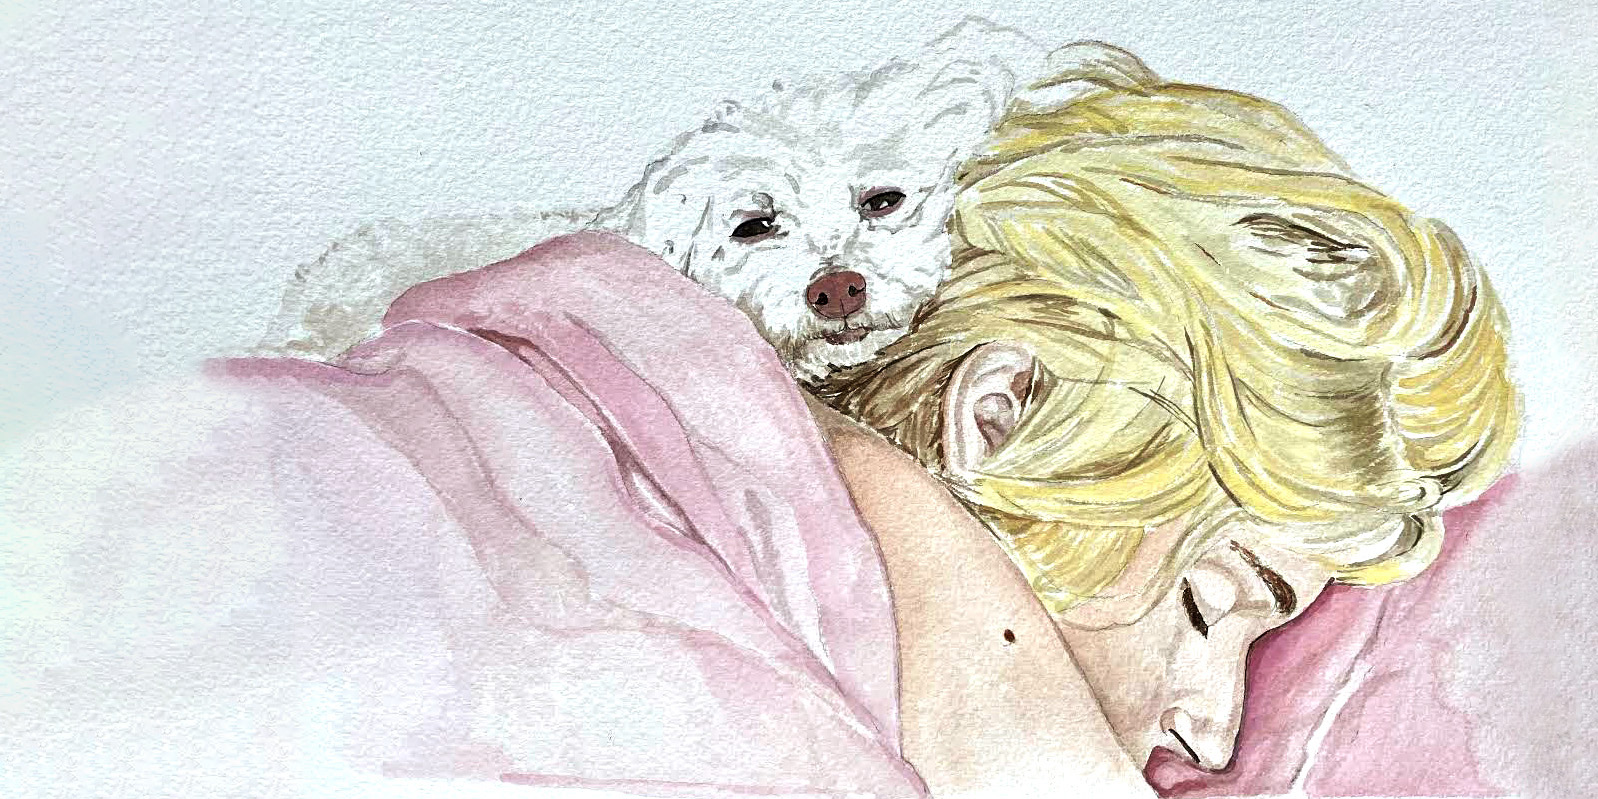 an original watercolor by Wallace May featuring Gabrielle, a blond woman, sleeping with her small white dog Kimberly on top of her